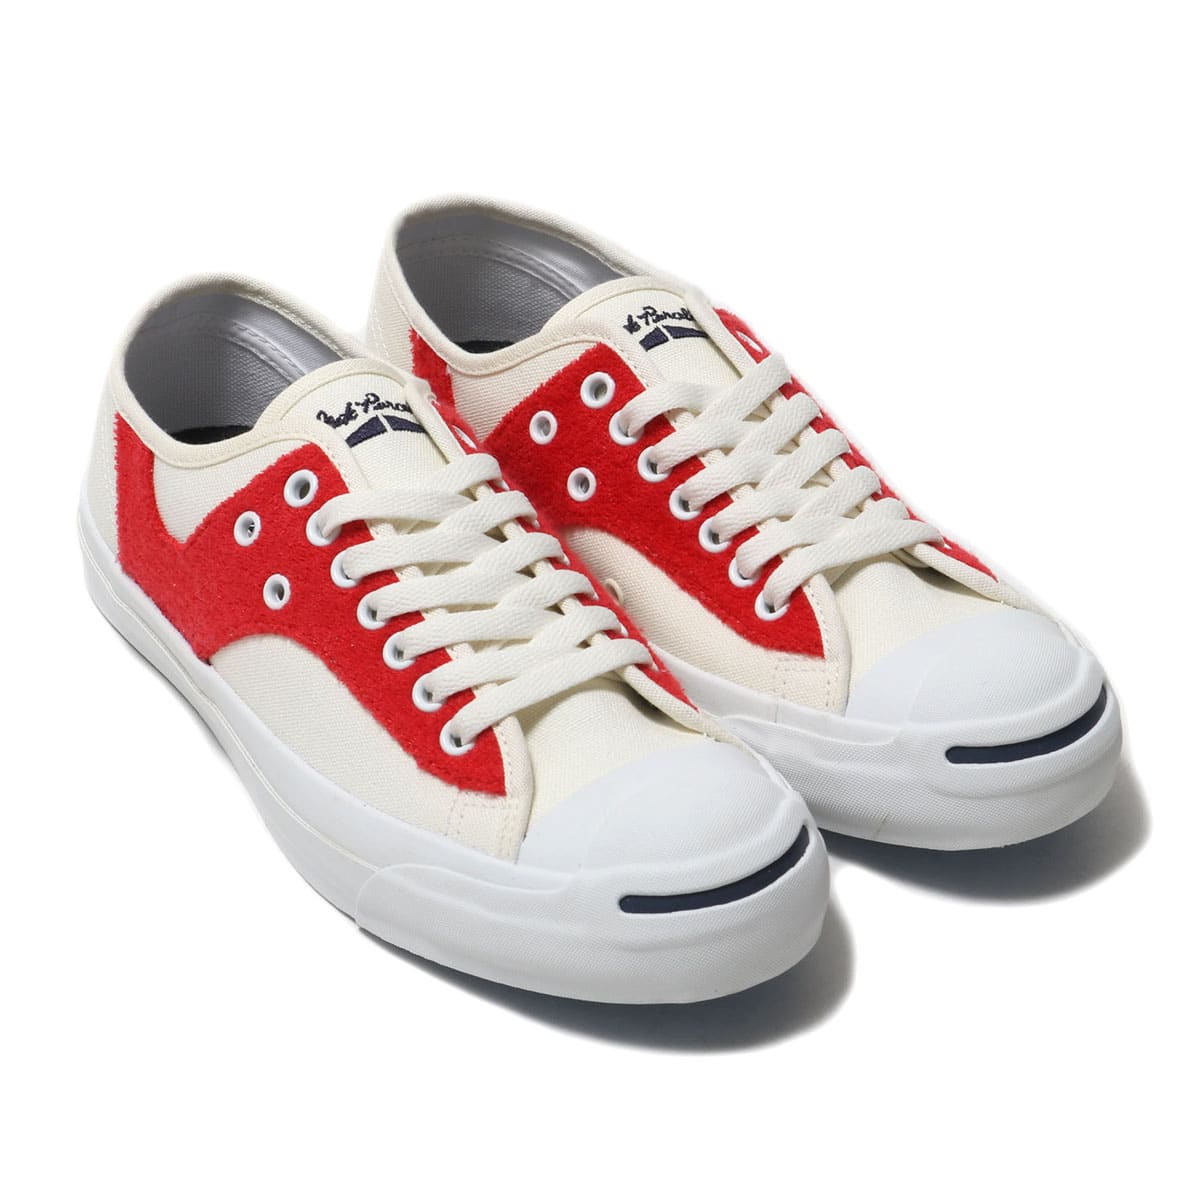 converse jack purcell rly lp rh